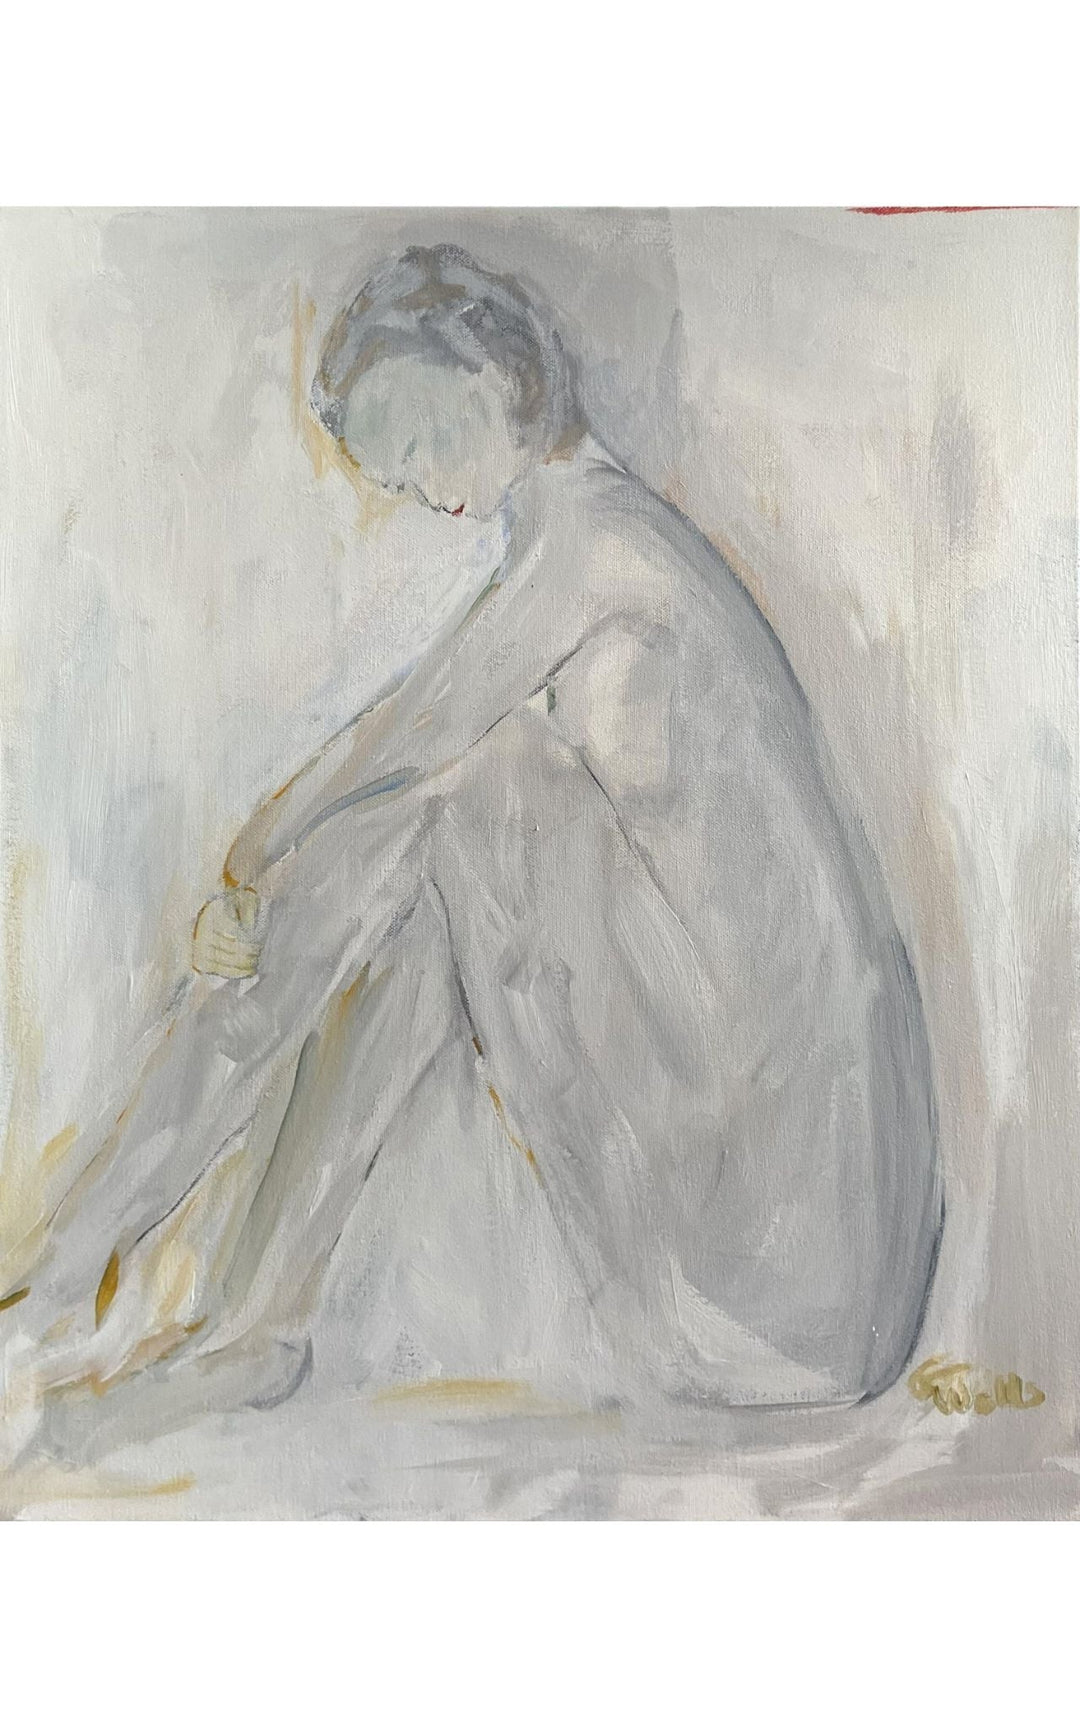 Acrylic on canvas abstract painting of female figure sitting with her knees to her chest. The colors are light creams and greys titled In Thought - Artly International